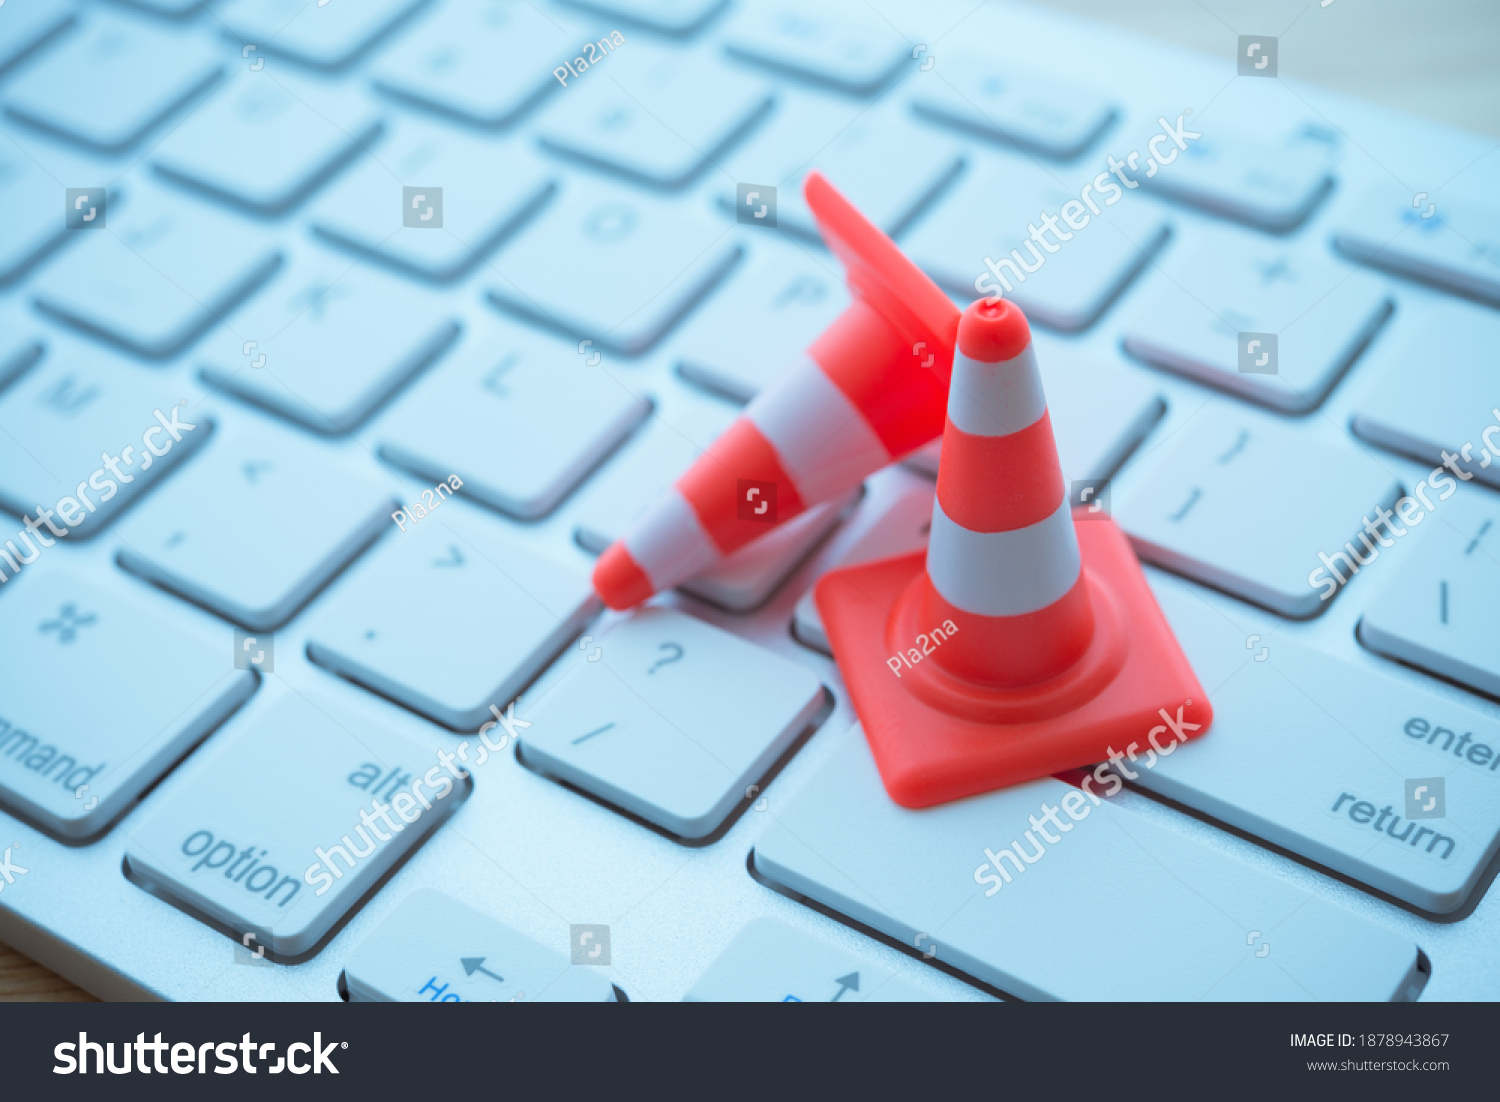 Maintenance, repair, under construction in computer system from virus or ransomware concept. Close up orange white traffic warning cones or pylon on keyboard computer background with copy space. #1878943867